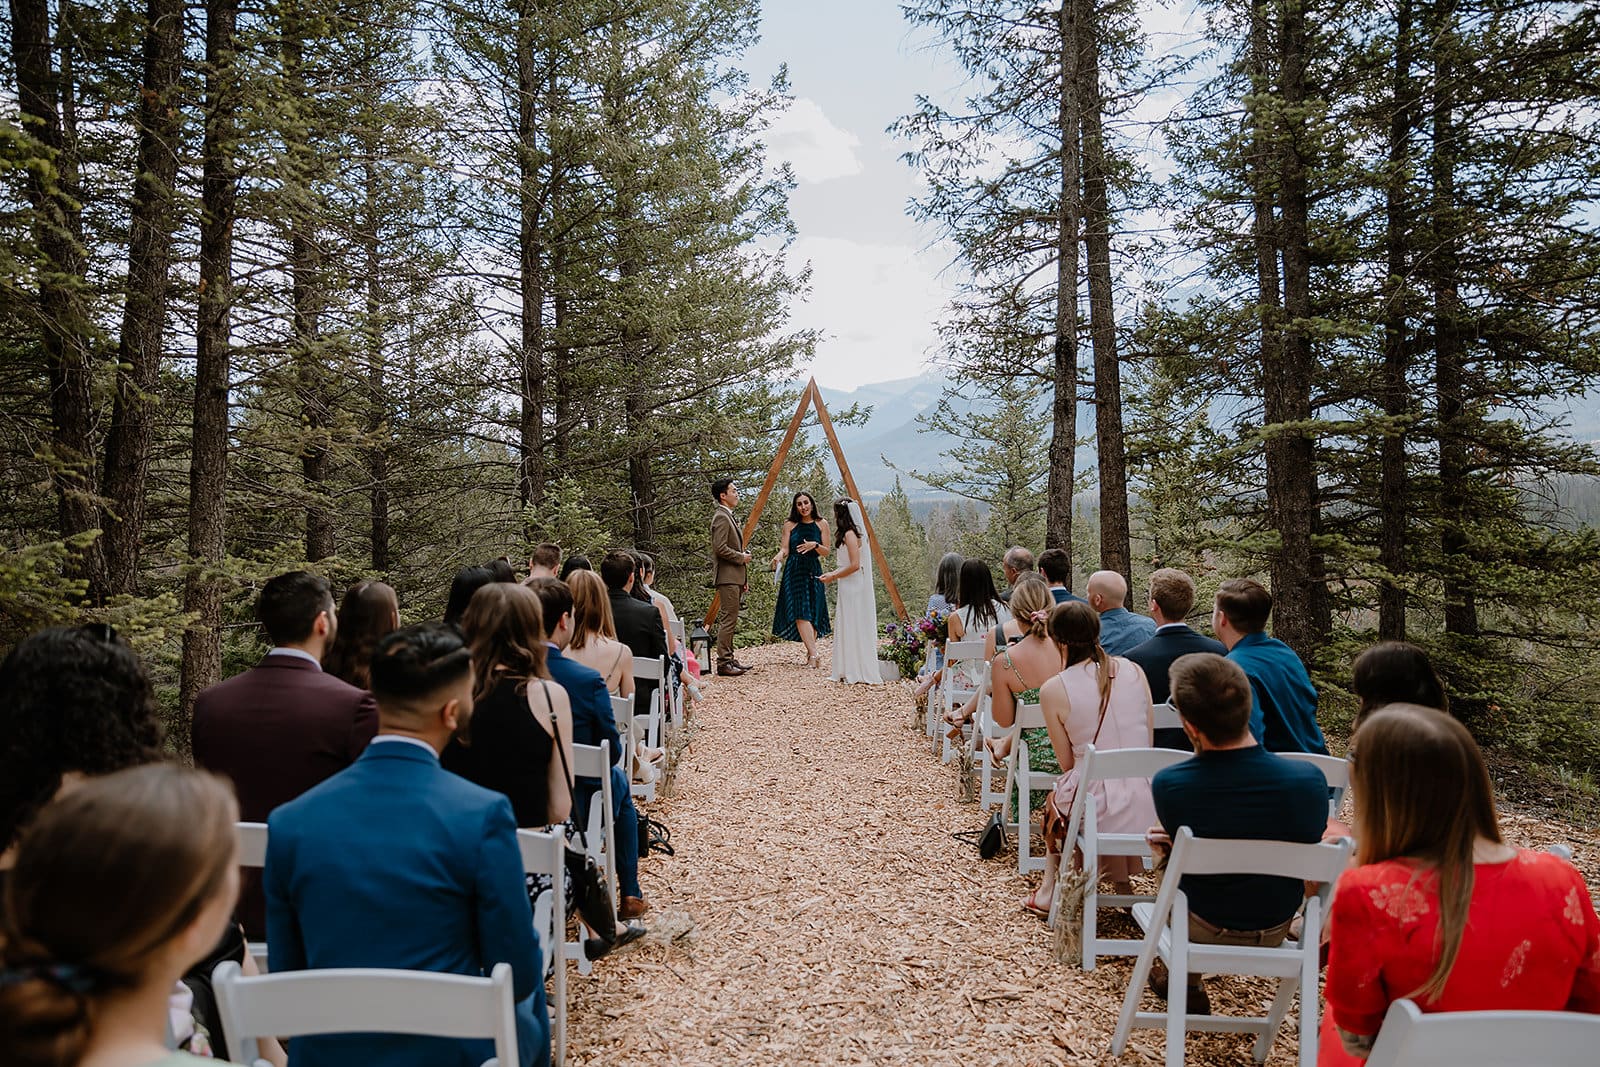 OUTDOOR WEDDING CEREMONY AT ALPINE CLUB OF CANADA IN CANMORE, AB